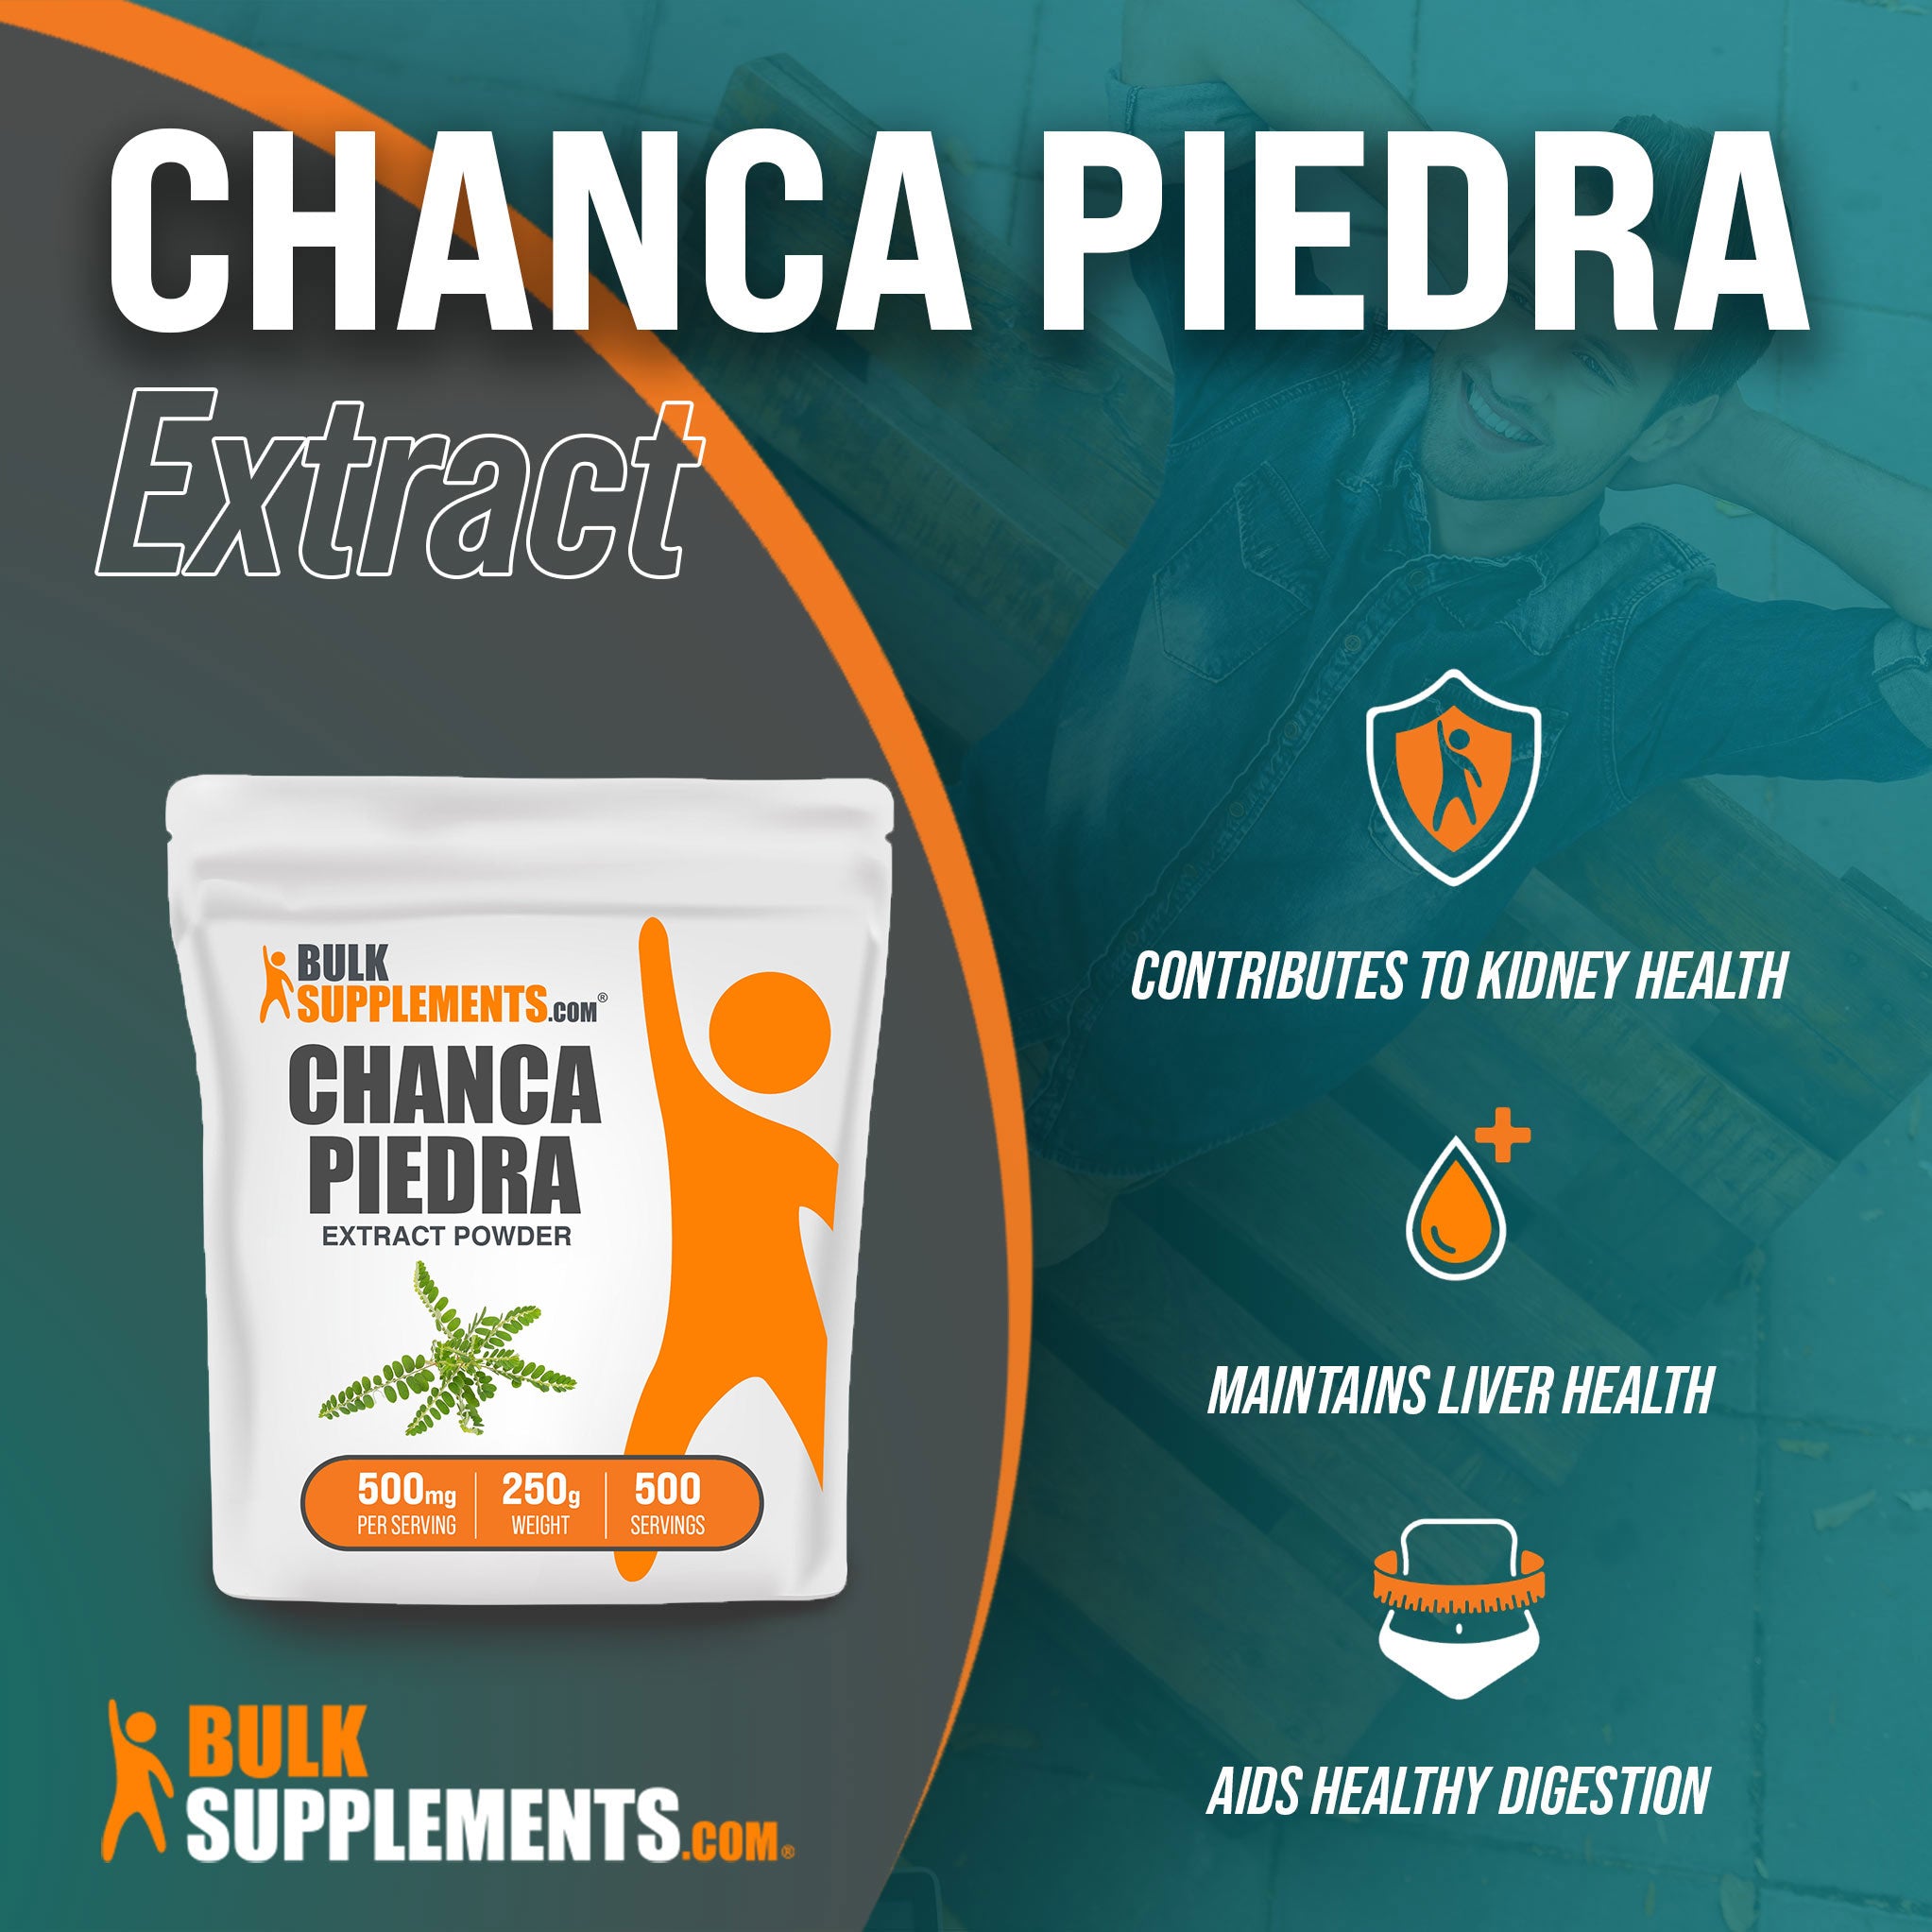 Benefits of Chanca Piedra Extract; contributes to kidney health, maintains liver health, aids healthy digestion